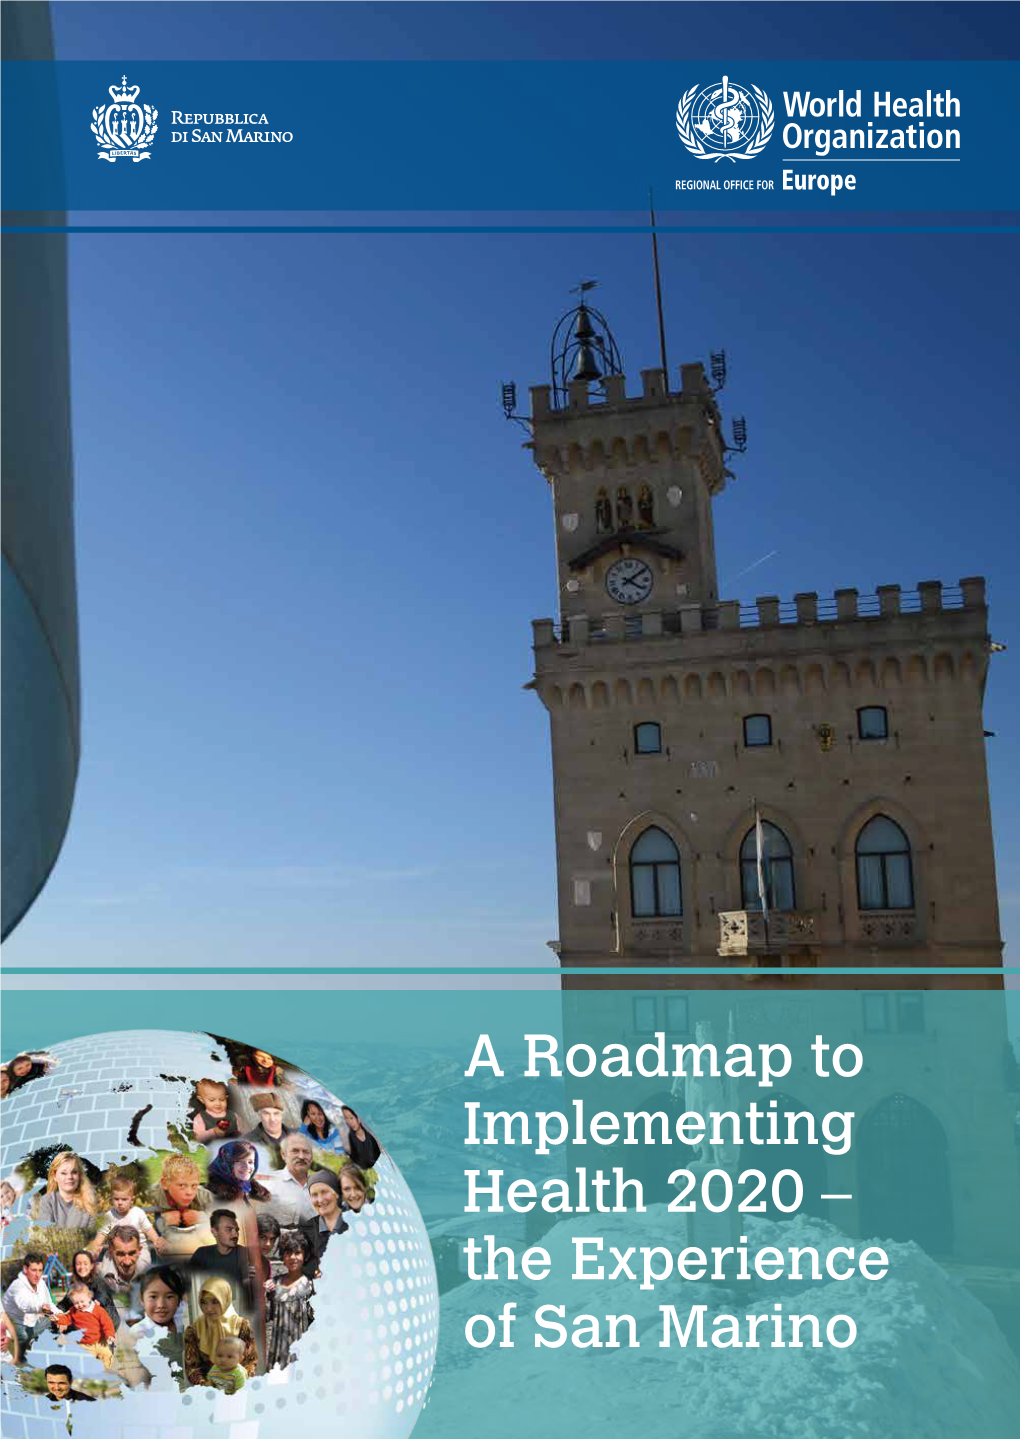 A Roadmap to Implementing Health 2020 – the Experience of San Marino